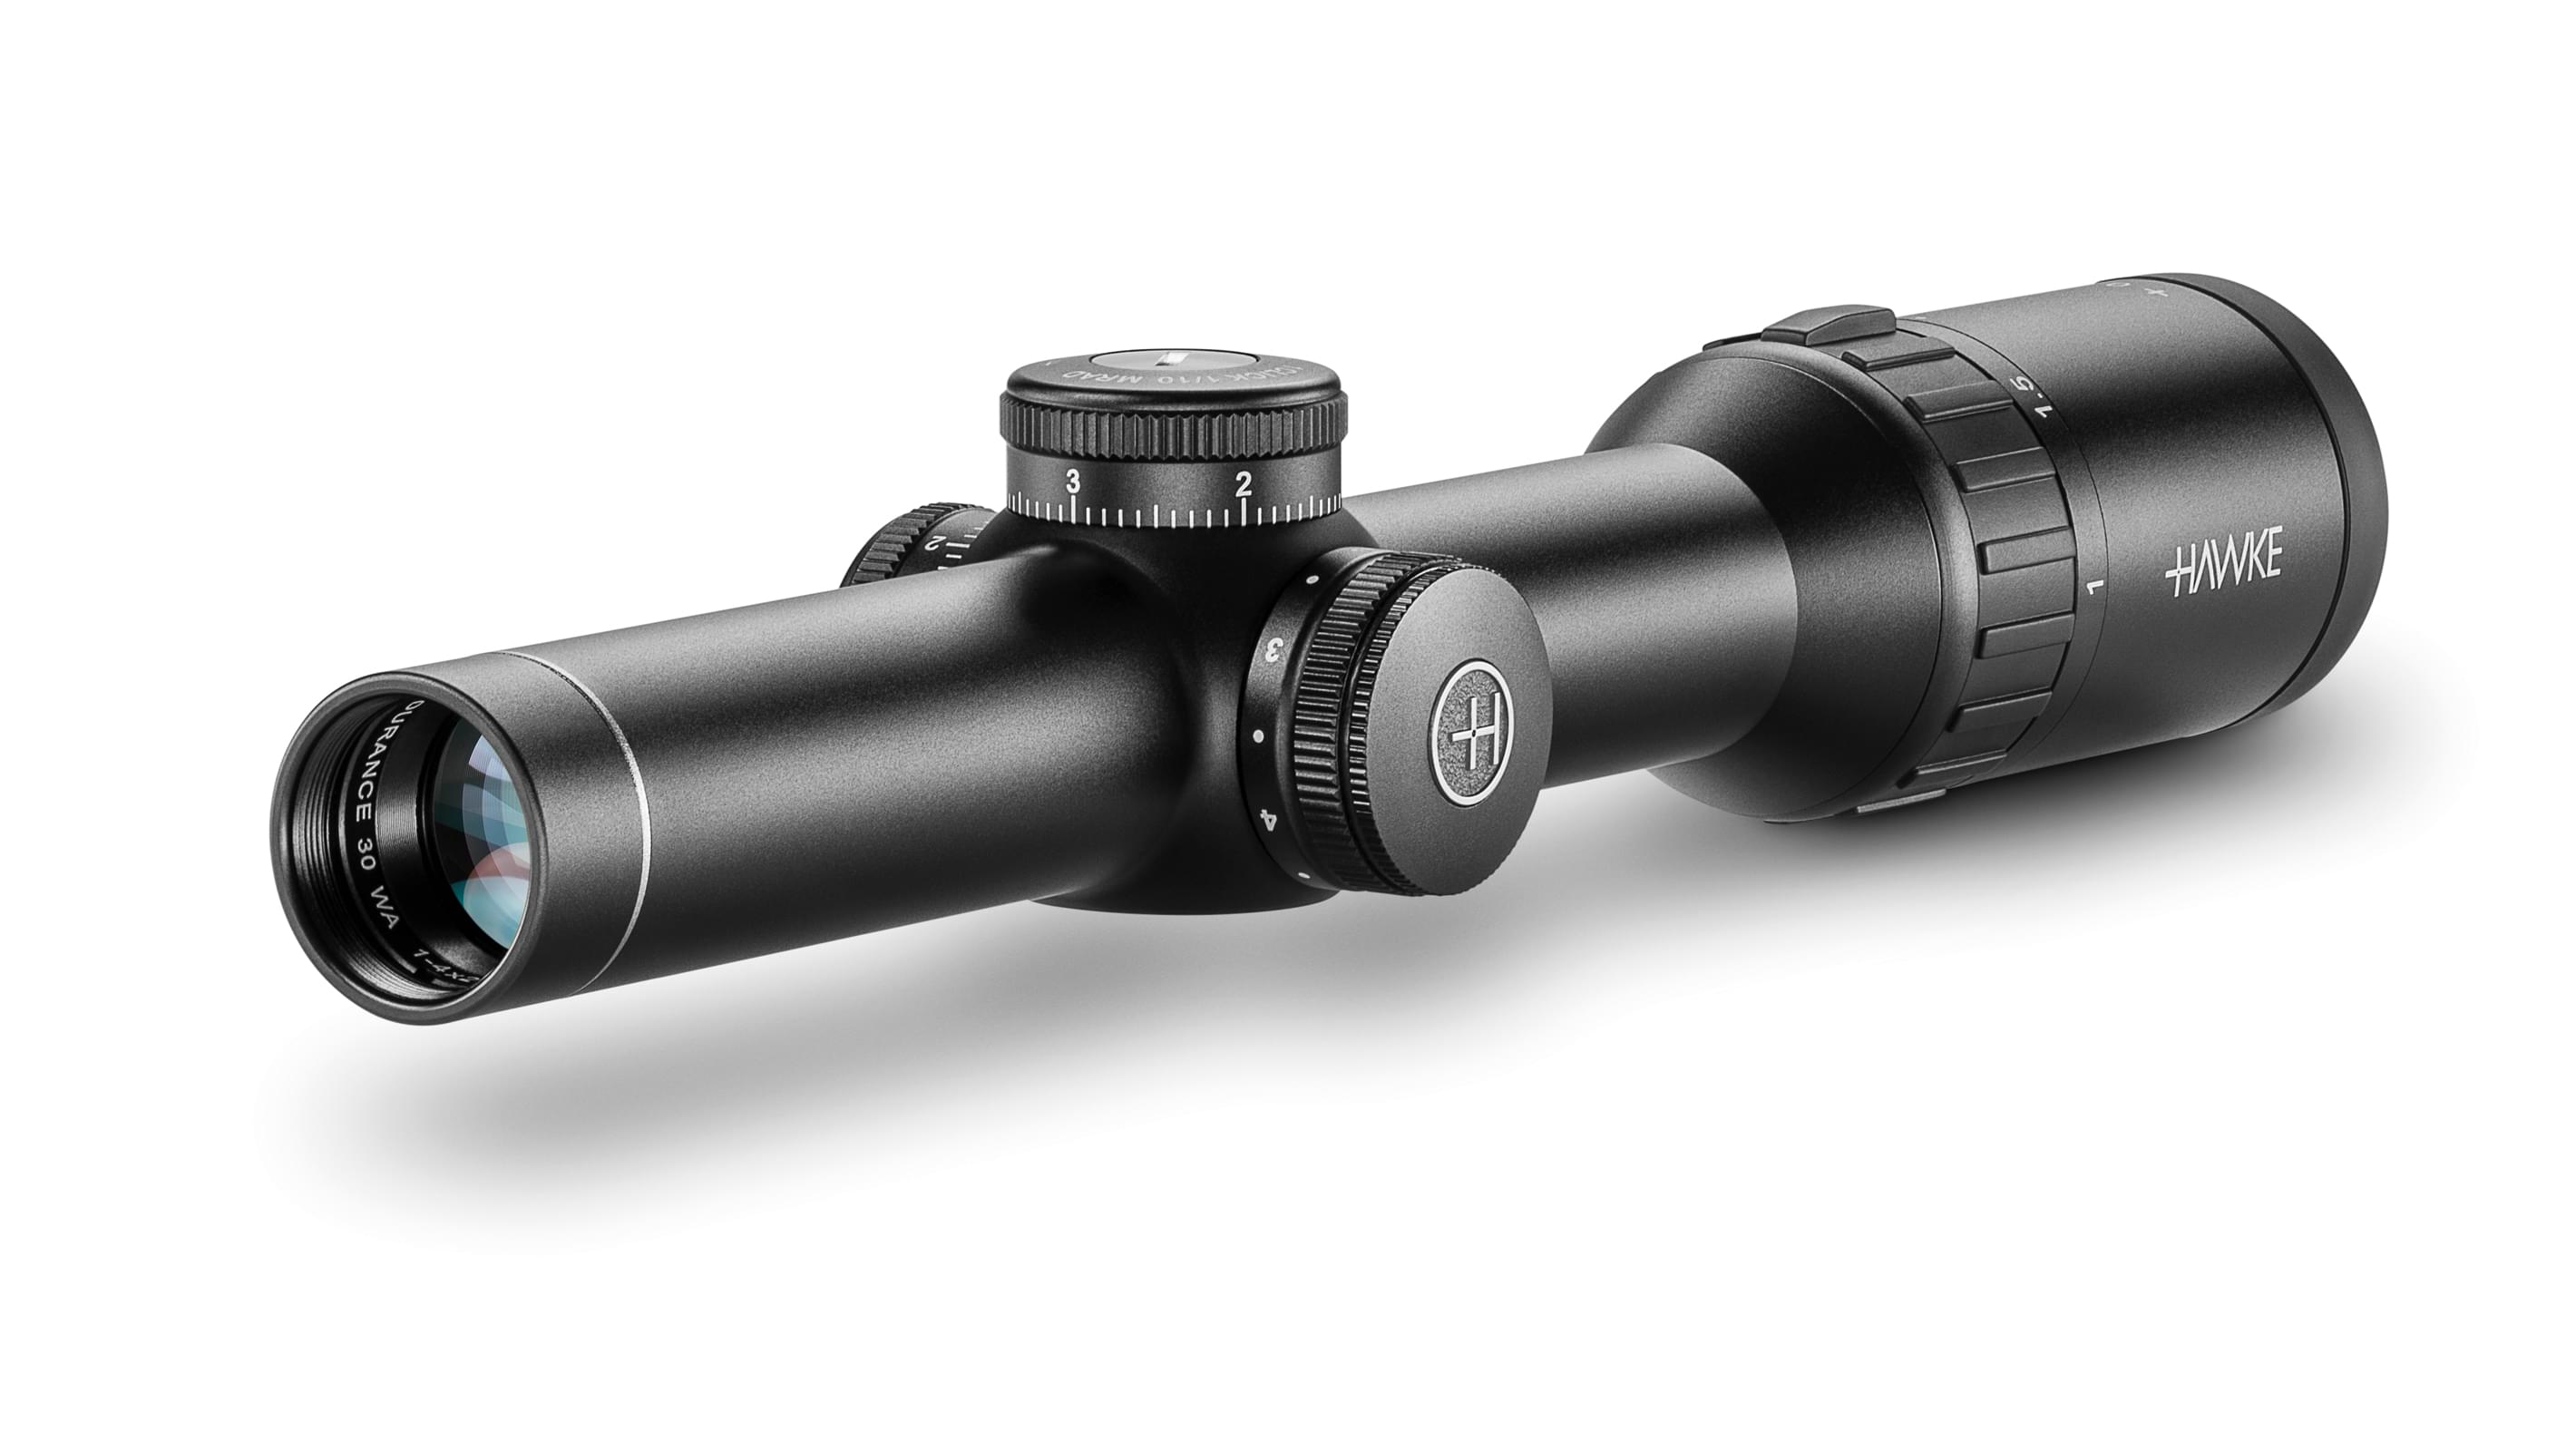 Objective End View Of The Hawke Endurance 30 WA 1-4x24 Tactical Dot Rifle Scope